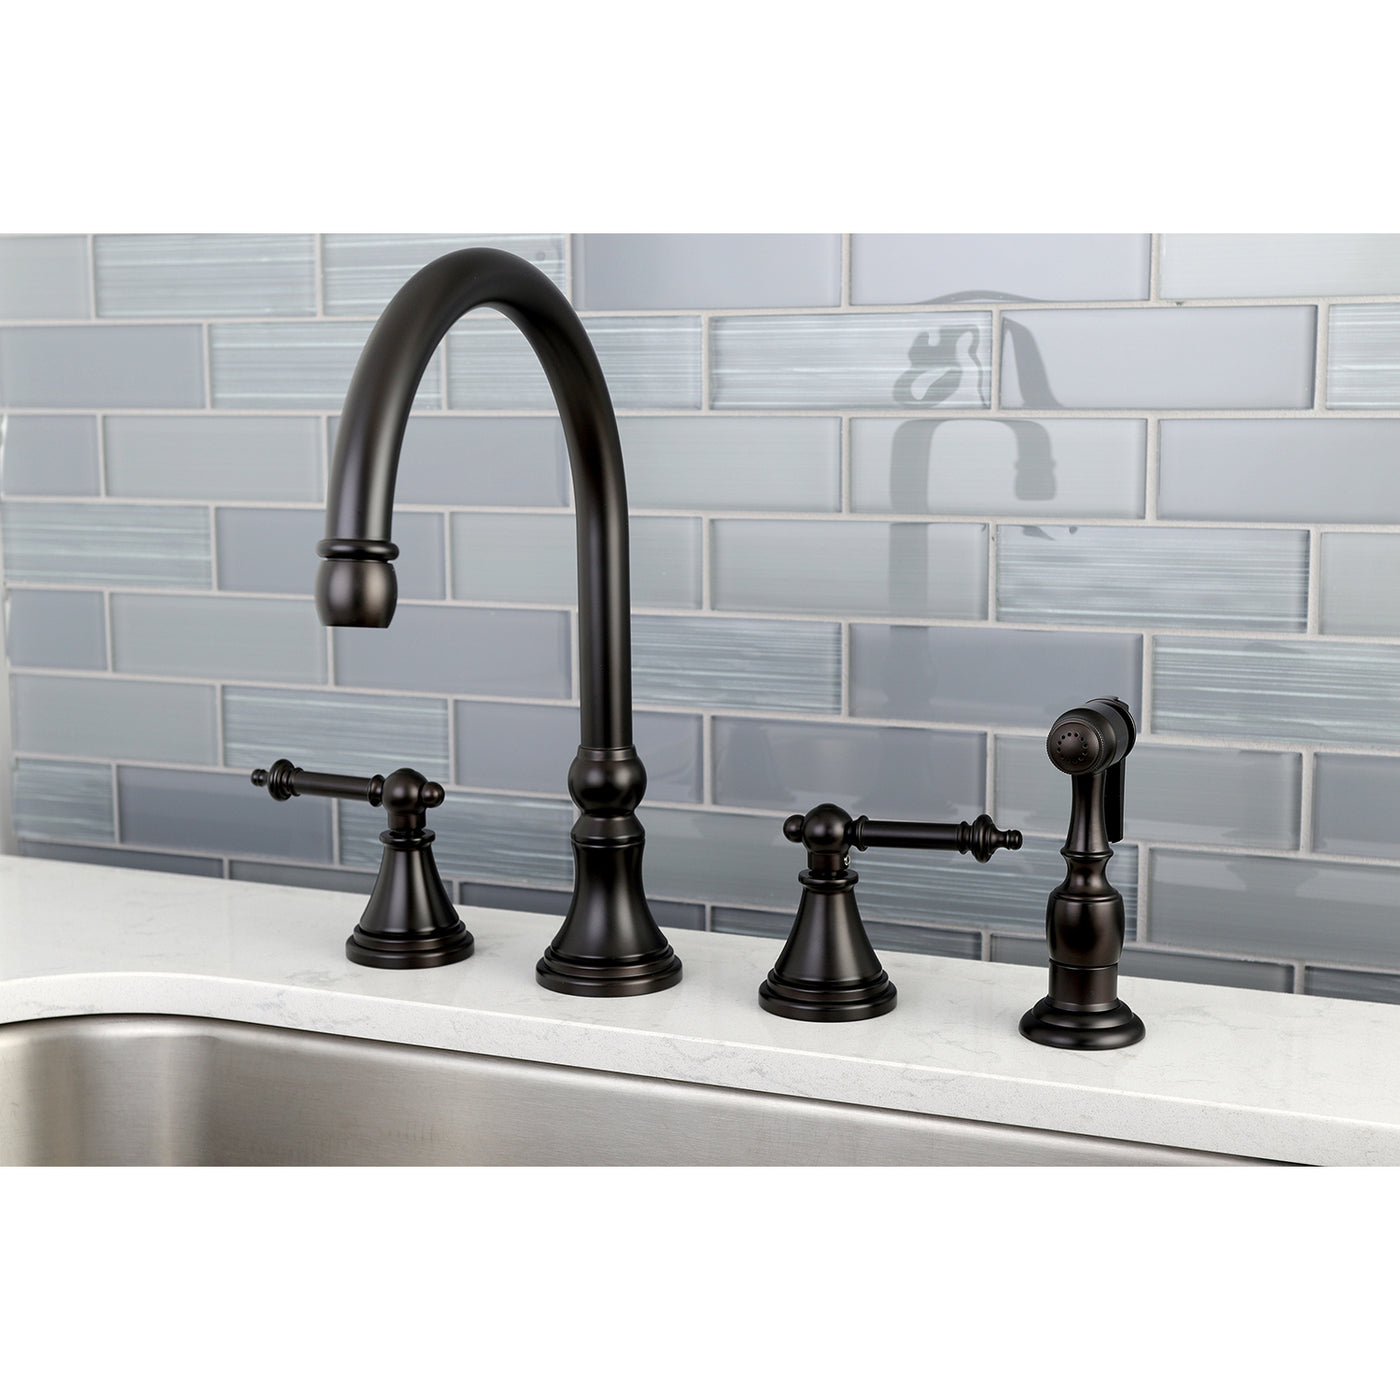 Elements of Design ES2795TLBS Widespread Kitchen Faucet with Brass Sprayer, Oil Rubbed Bronze